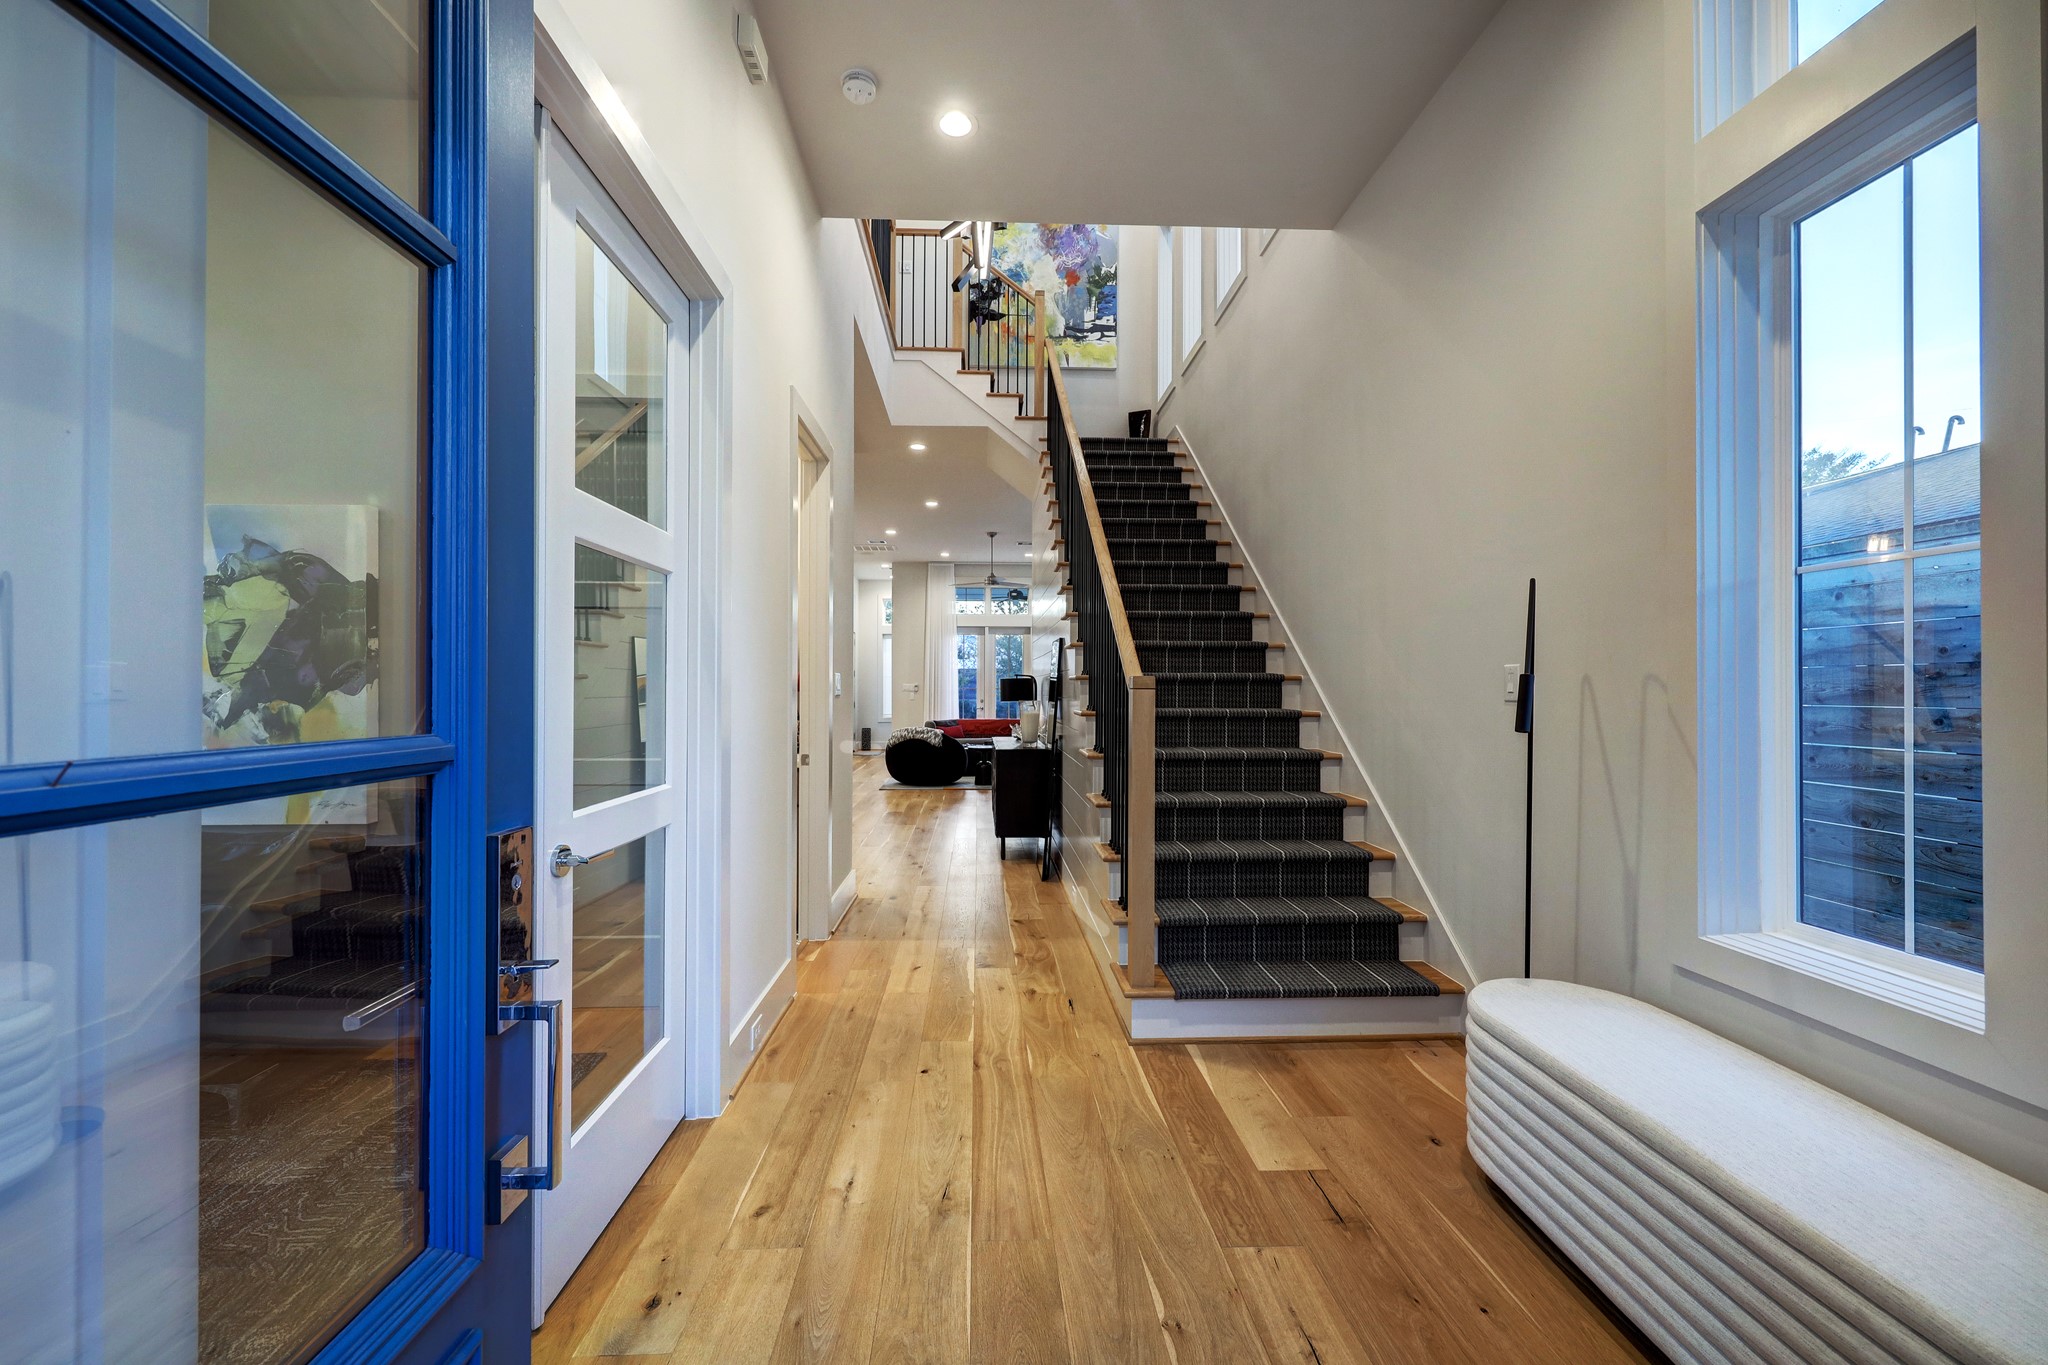 A charming blue entry door opens to a gracious foyer that introduces the home's soaring ceilings, oversized windows, wide-plank hardwood floors and beautiful millwork.